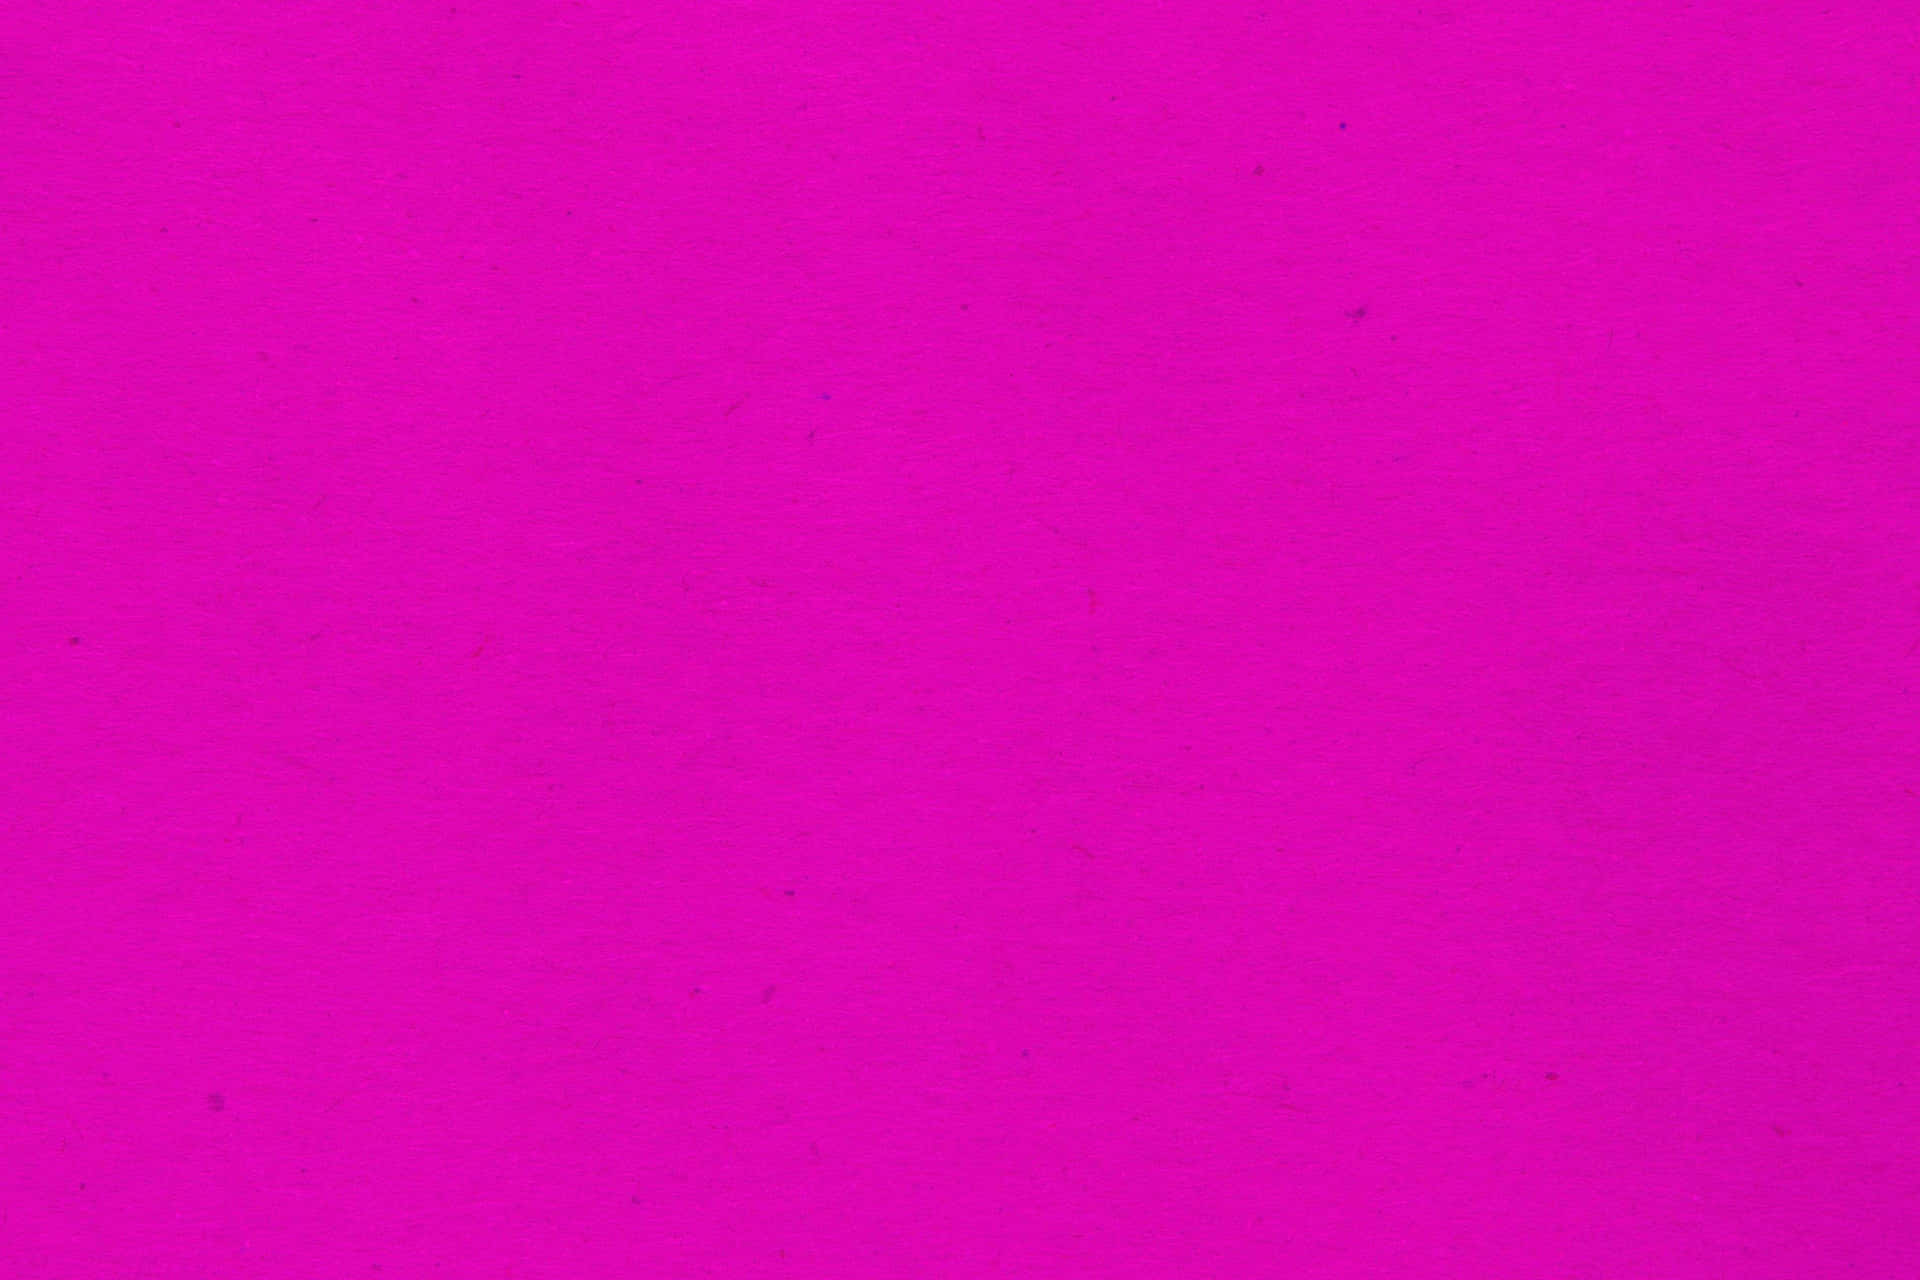 1000+ Neon Pink Pictures | Download Free Images on Unsplash